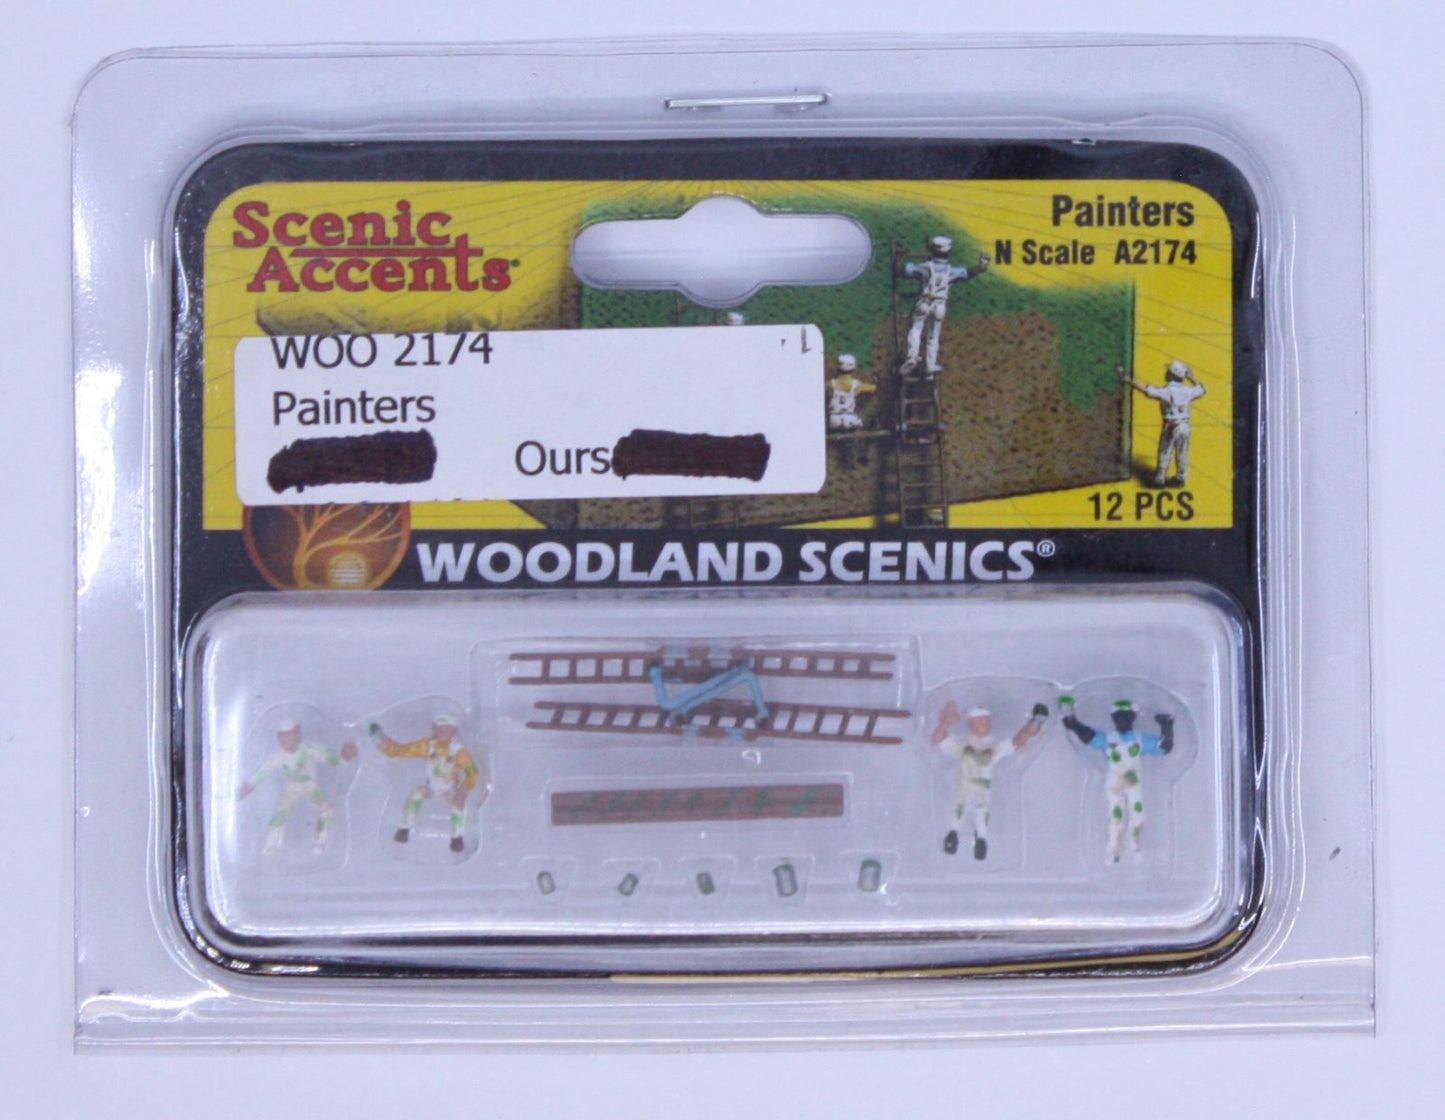 Woodland Scenics A2174 N Scenic Accents Painter Figures (Set of 12)